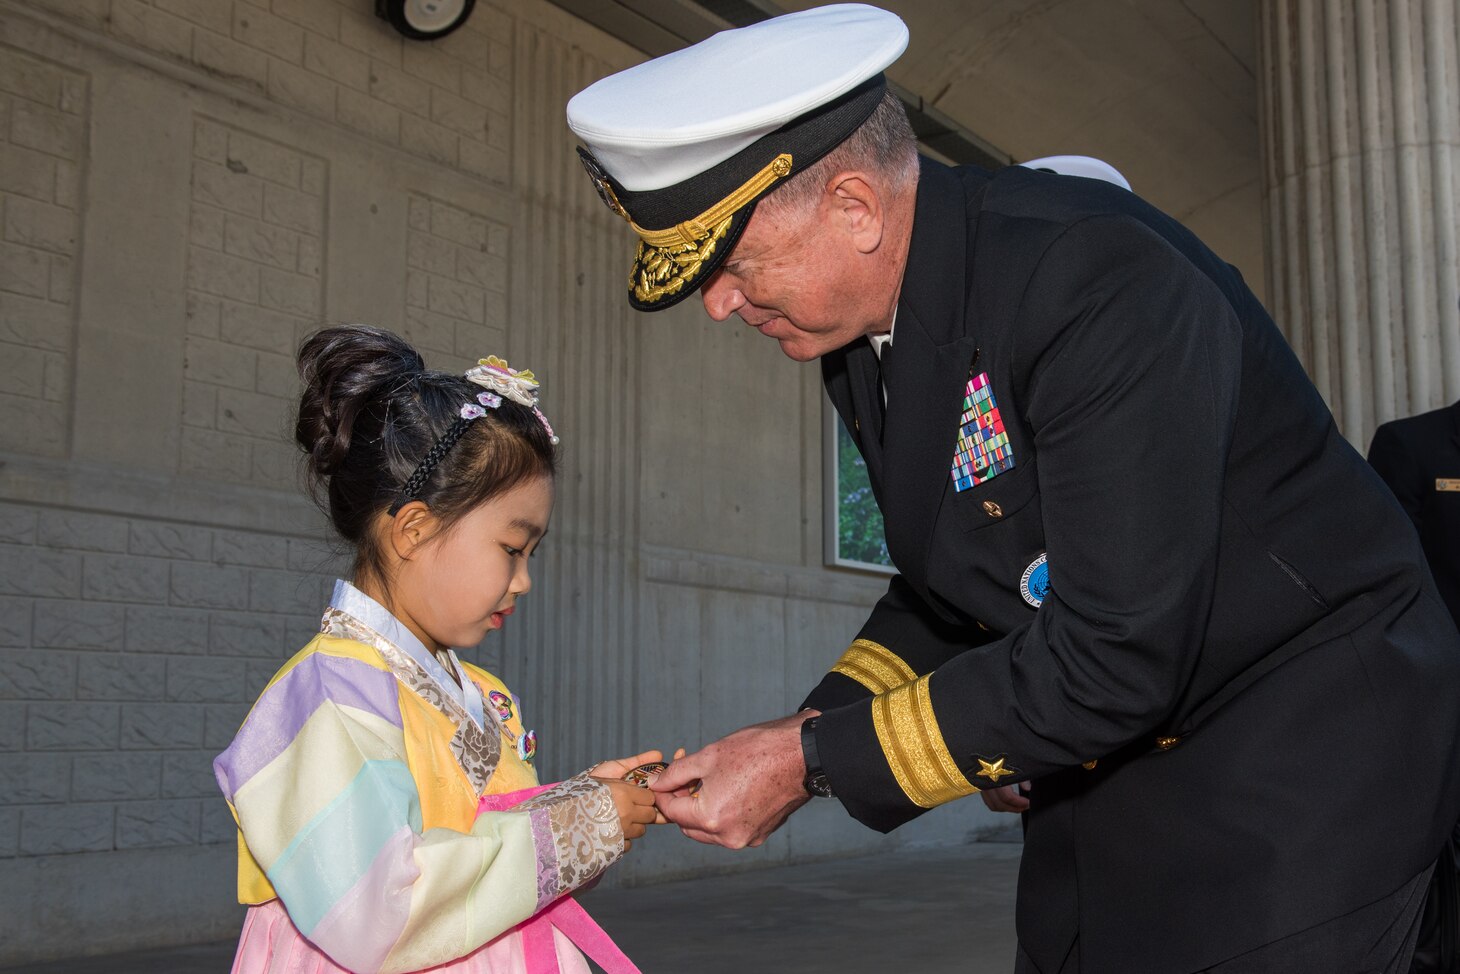 JEJU ISLAND, Republic of Korea, (Oct. 12, 2018) Rear Adm. Michael E. Boyle, commander, U.S. Naval Forces Korea (CNFK) presents a coin to a young girl during a welcome ceremony at the Republic of Korea (ROK) Navy base in Jeju. CNFK is the U.S. Navy's representative in the ROK, providing leadership and expertise in naval matters to improve institutional and operational effectiveness between the two navies and to strengthen collective security efforts in Korea and the region.